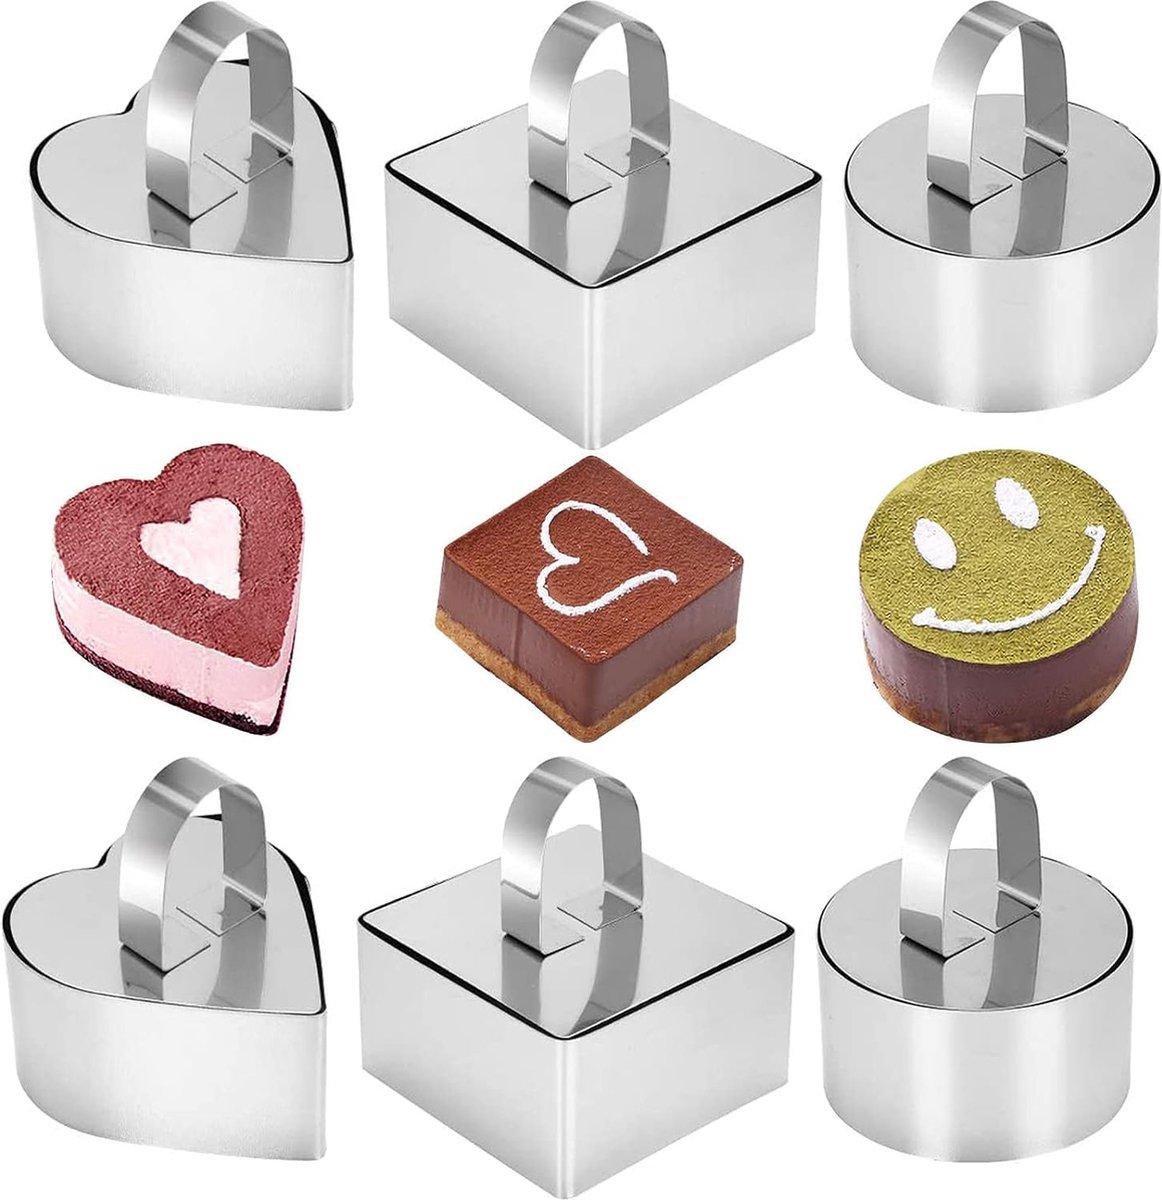 Cake Ring, Pack of 6 Dessert Rings, 2 Round Shapes, 2 Square Shapes, 2 Heart Shapes, Thickened Stainless Steel Cake Ring Mould for Dessert Pastry Mousse